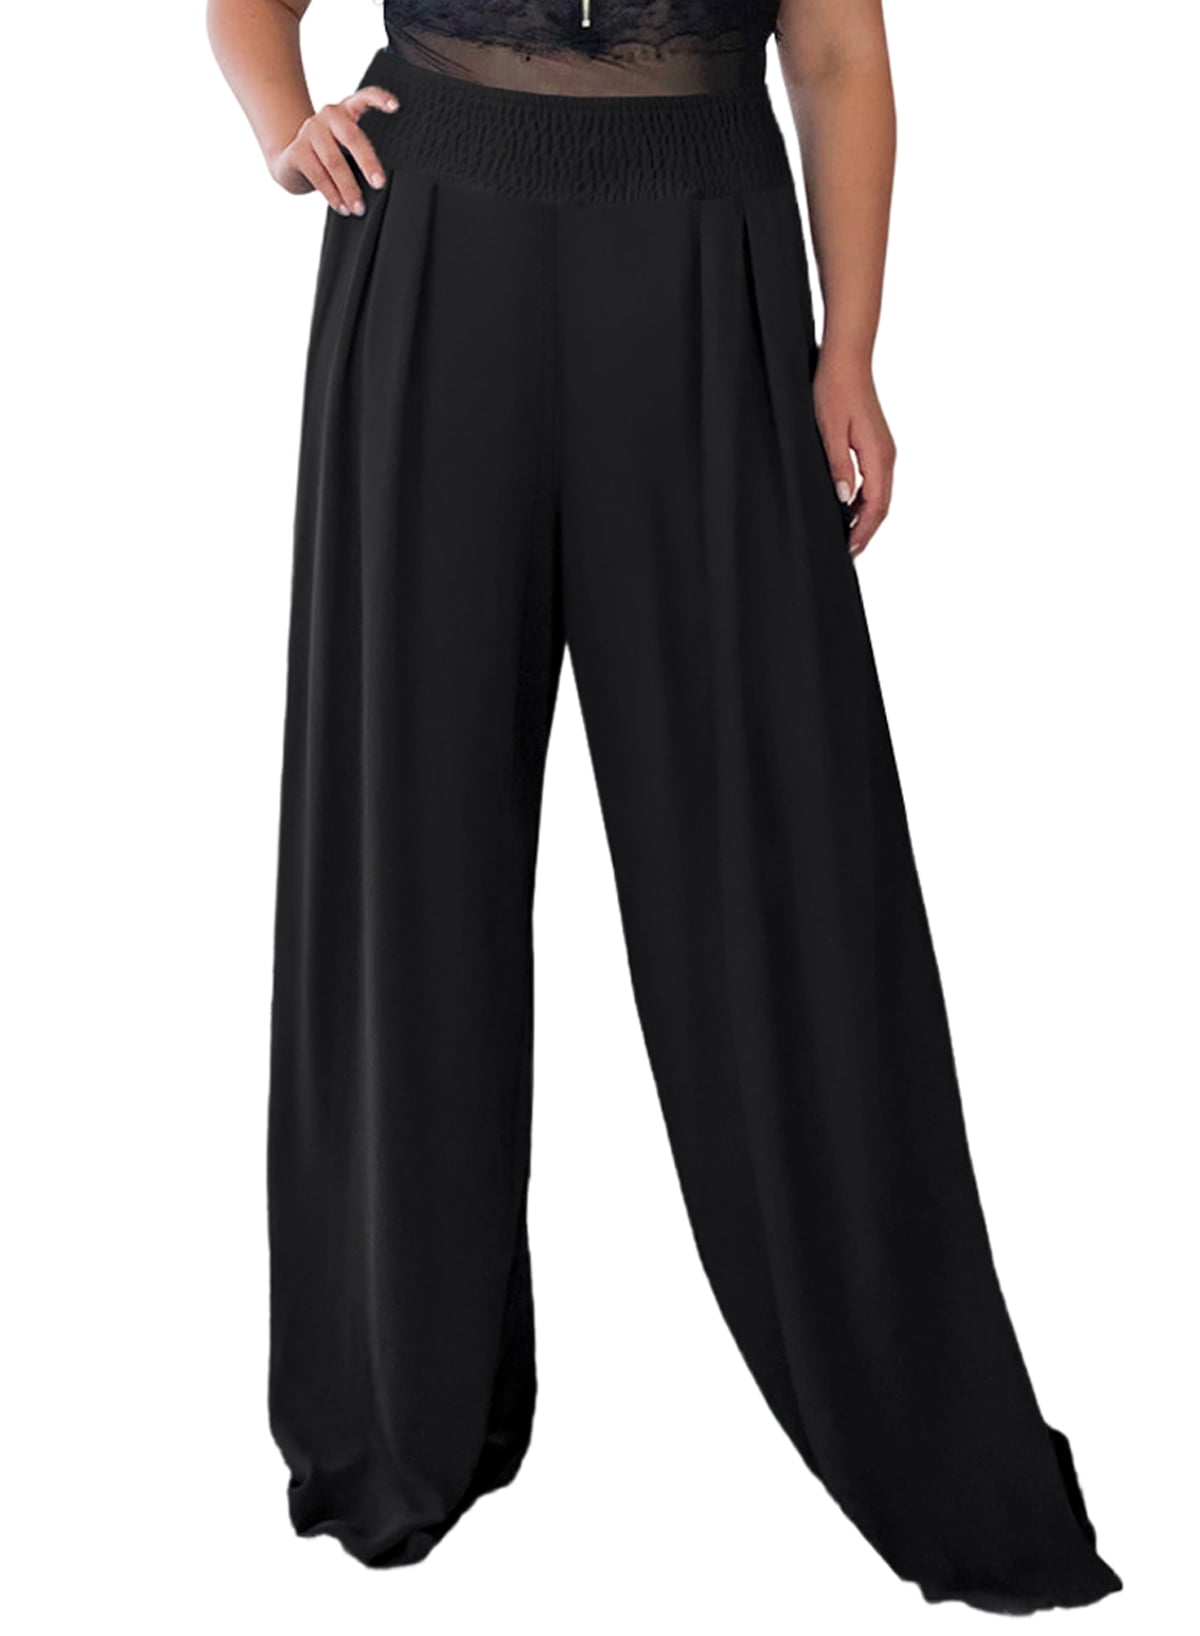 ZKESS Plus Size Wide Leg Pants for Women Casual Loose Smocked High ...